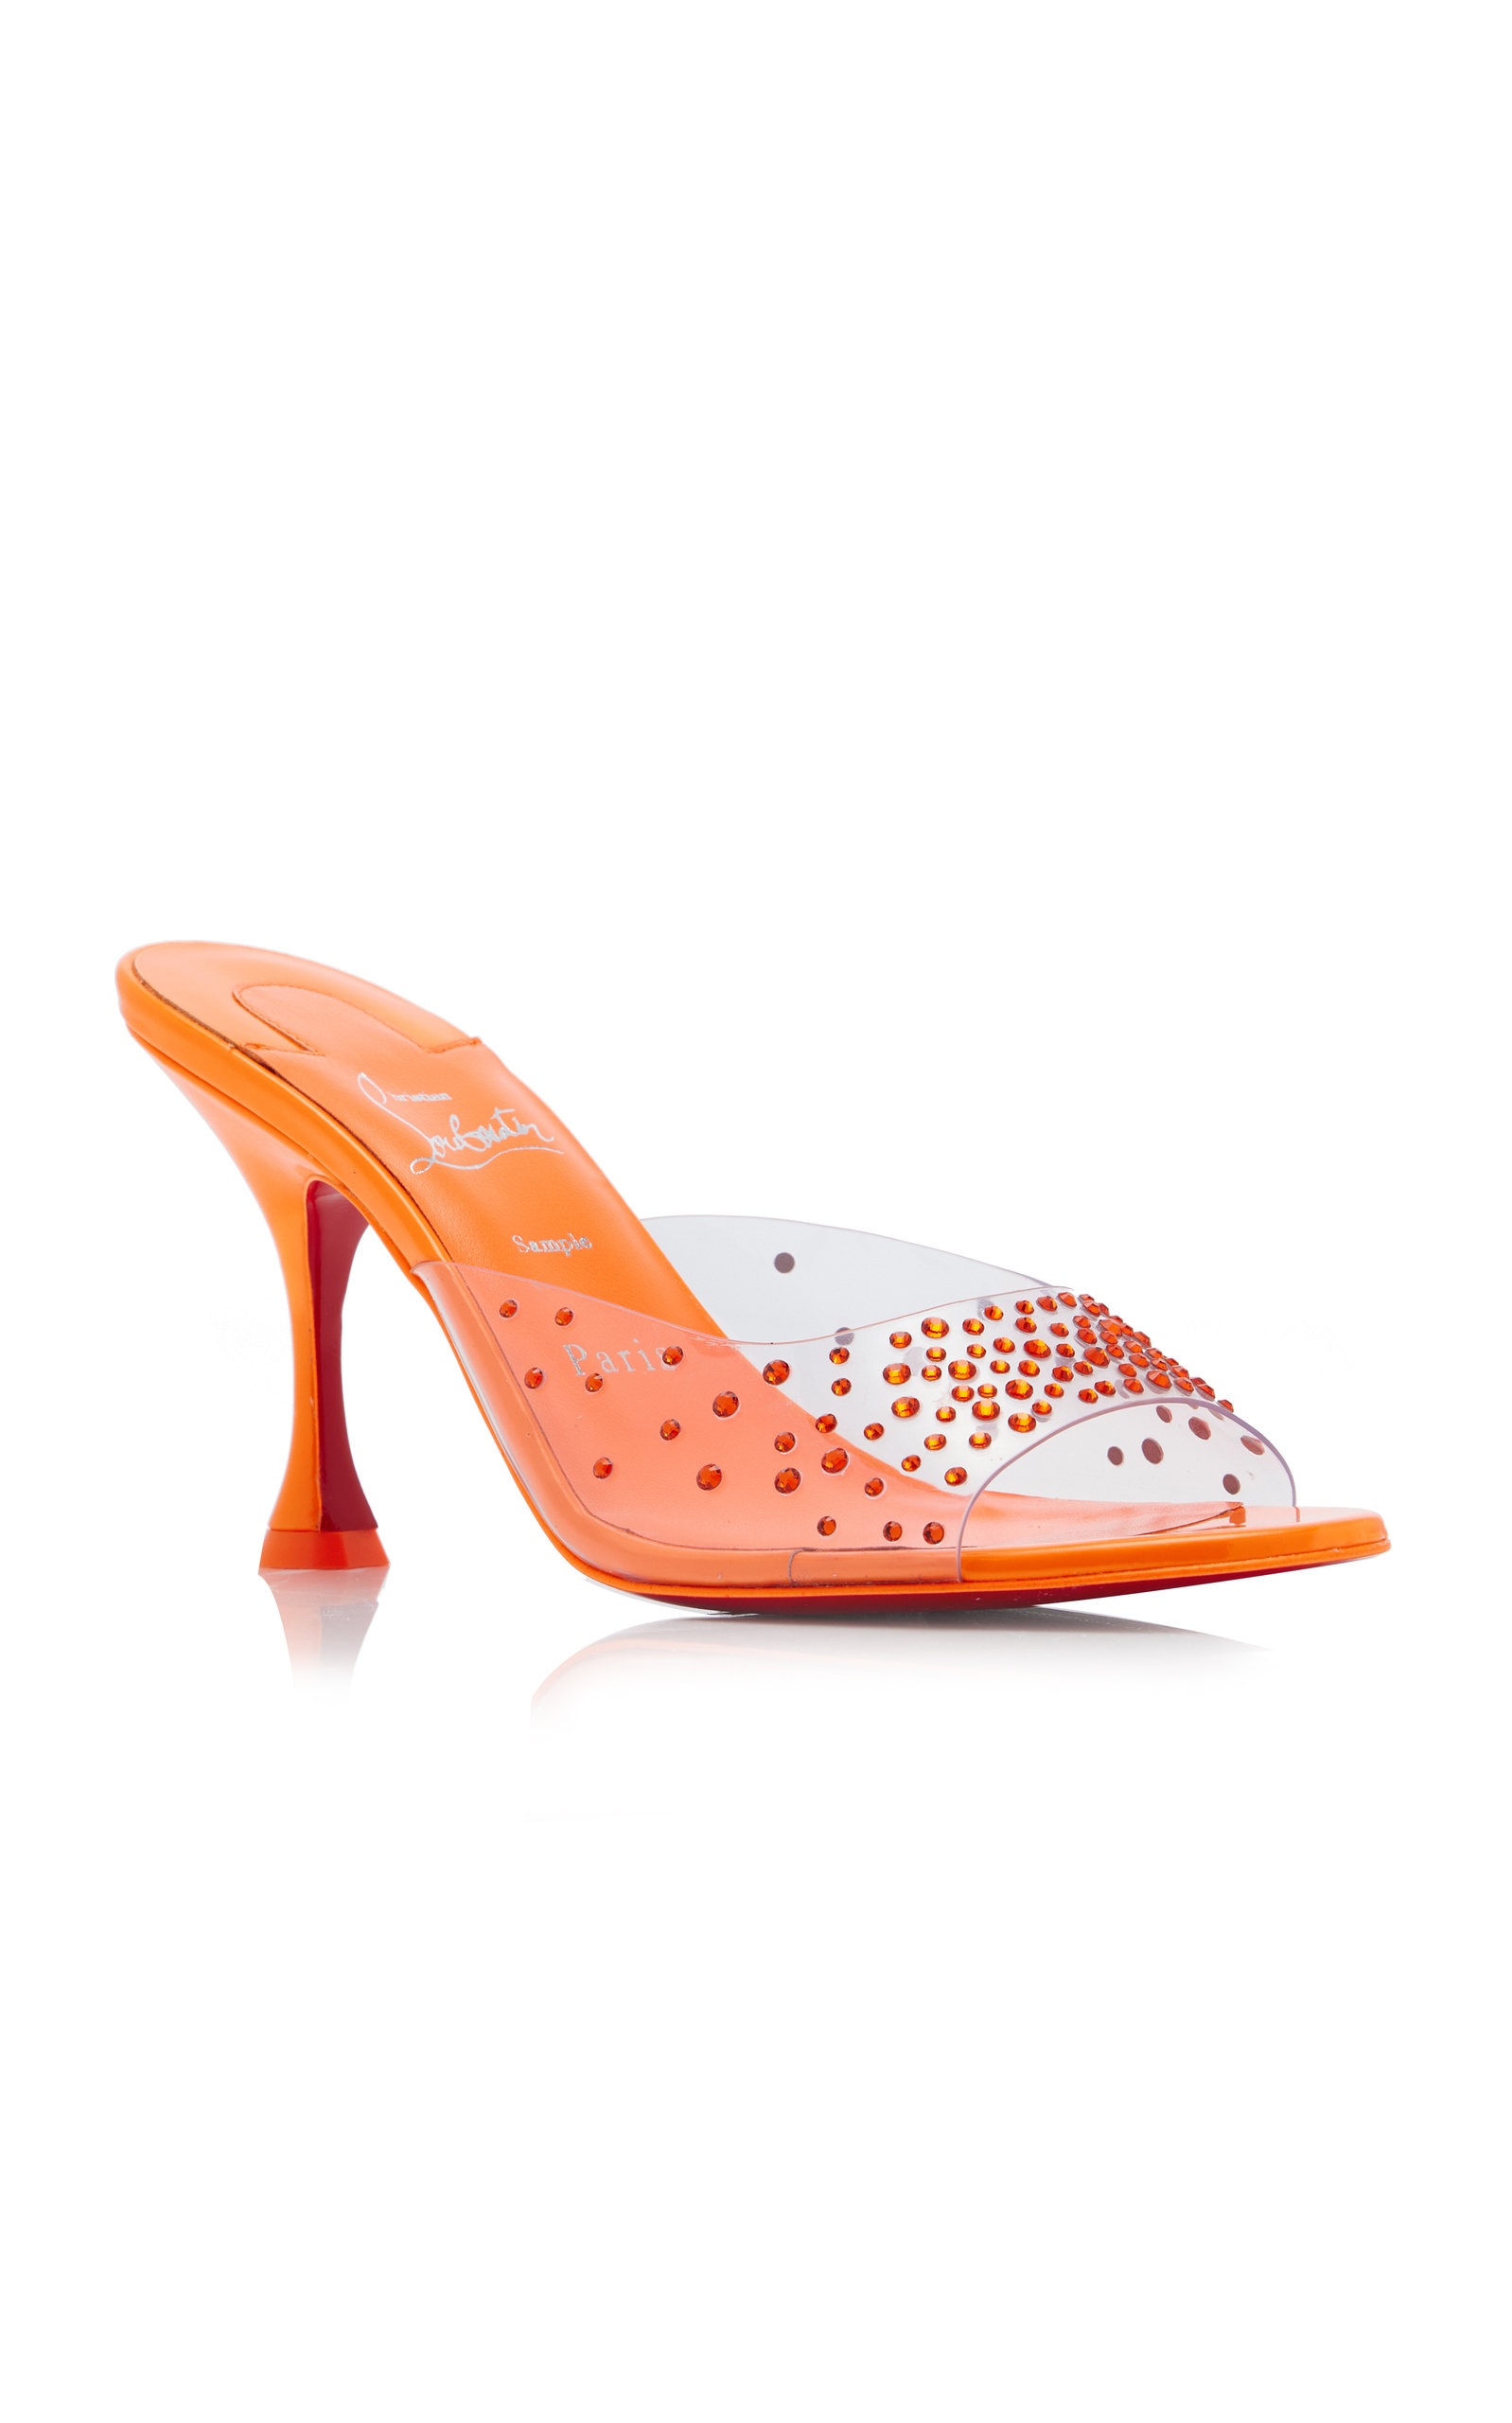 Degramule Strass Patent Leather and PVC Sandals orange - 4